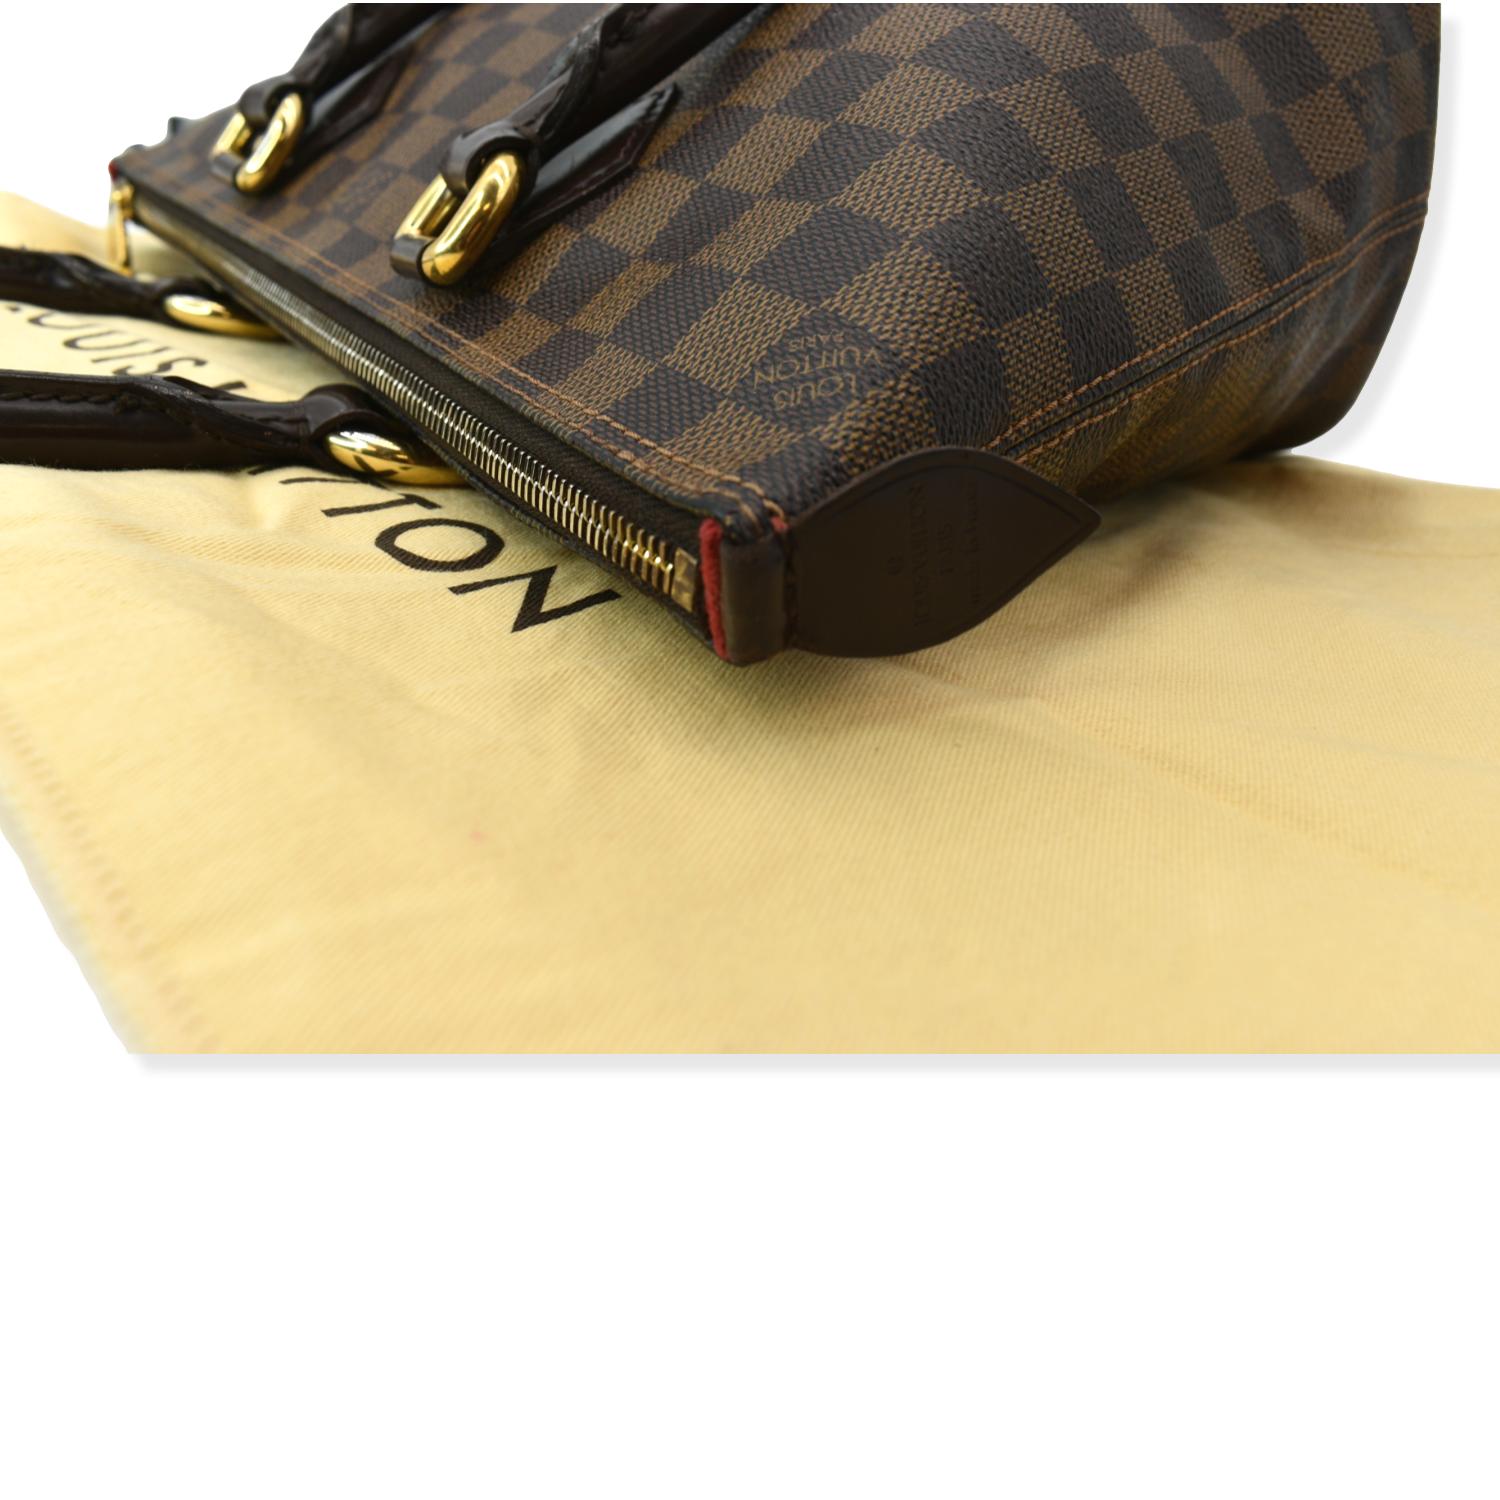 Shop for Louis Vuitton Damier Ebene Canvas Leather Saleya PM Bag - Shipped  from USA